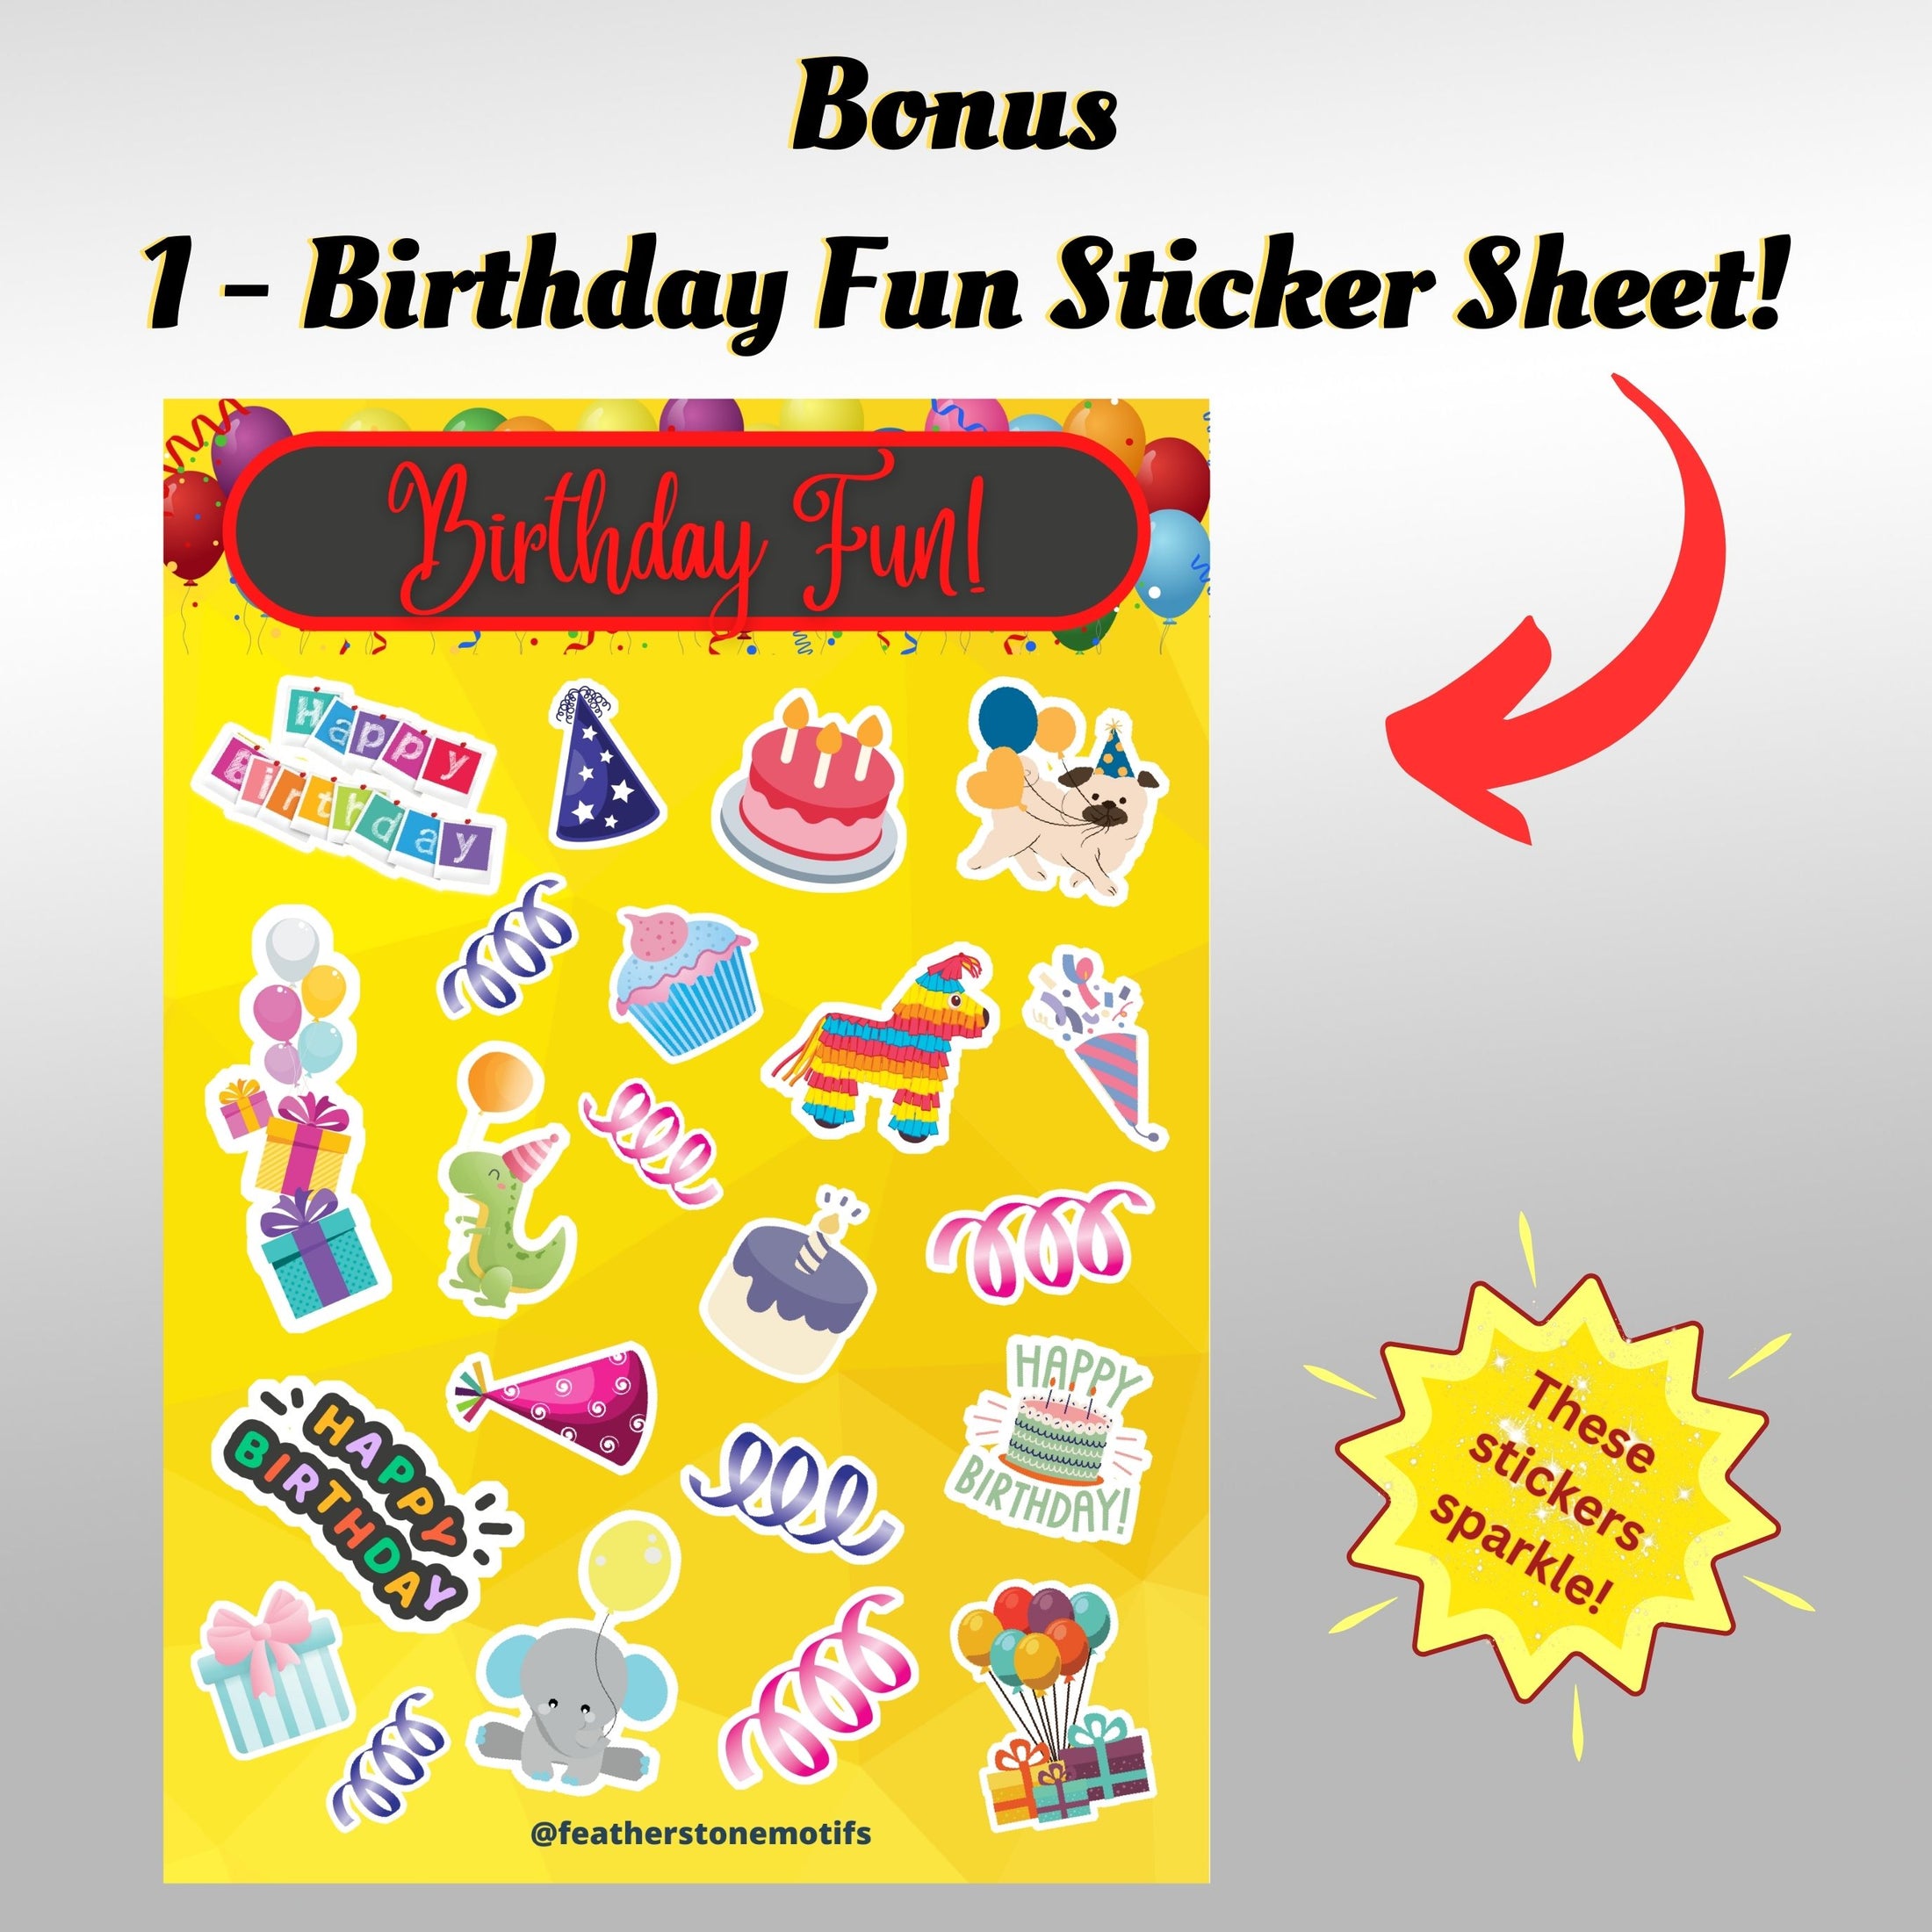 This image shows the Birthday Fun sticker sheet that is included with each order.